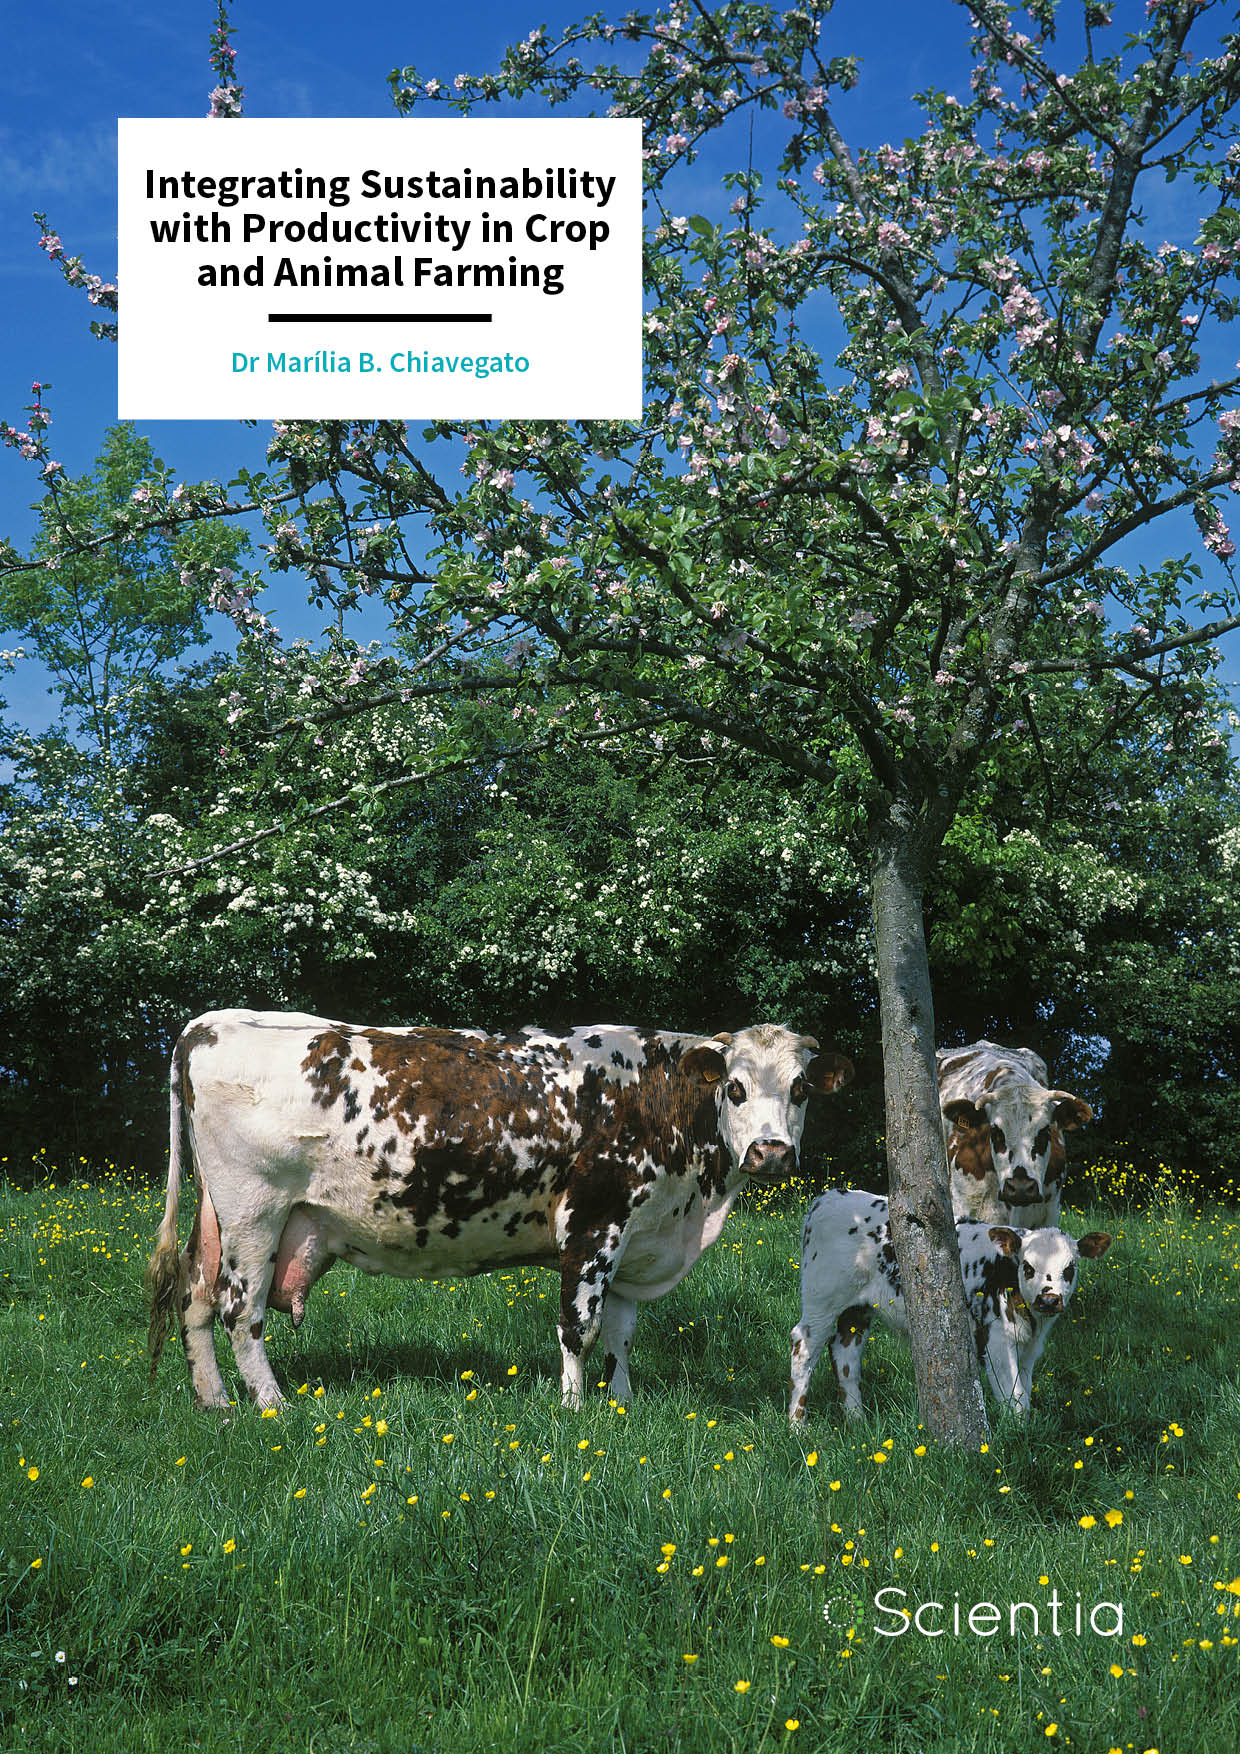 Dr Marília Chiavegato – Integrating Sustainability with Productivity in Crop and Animal Farming